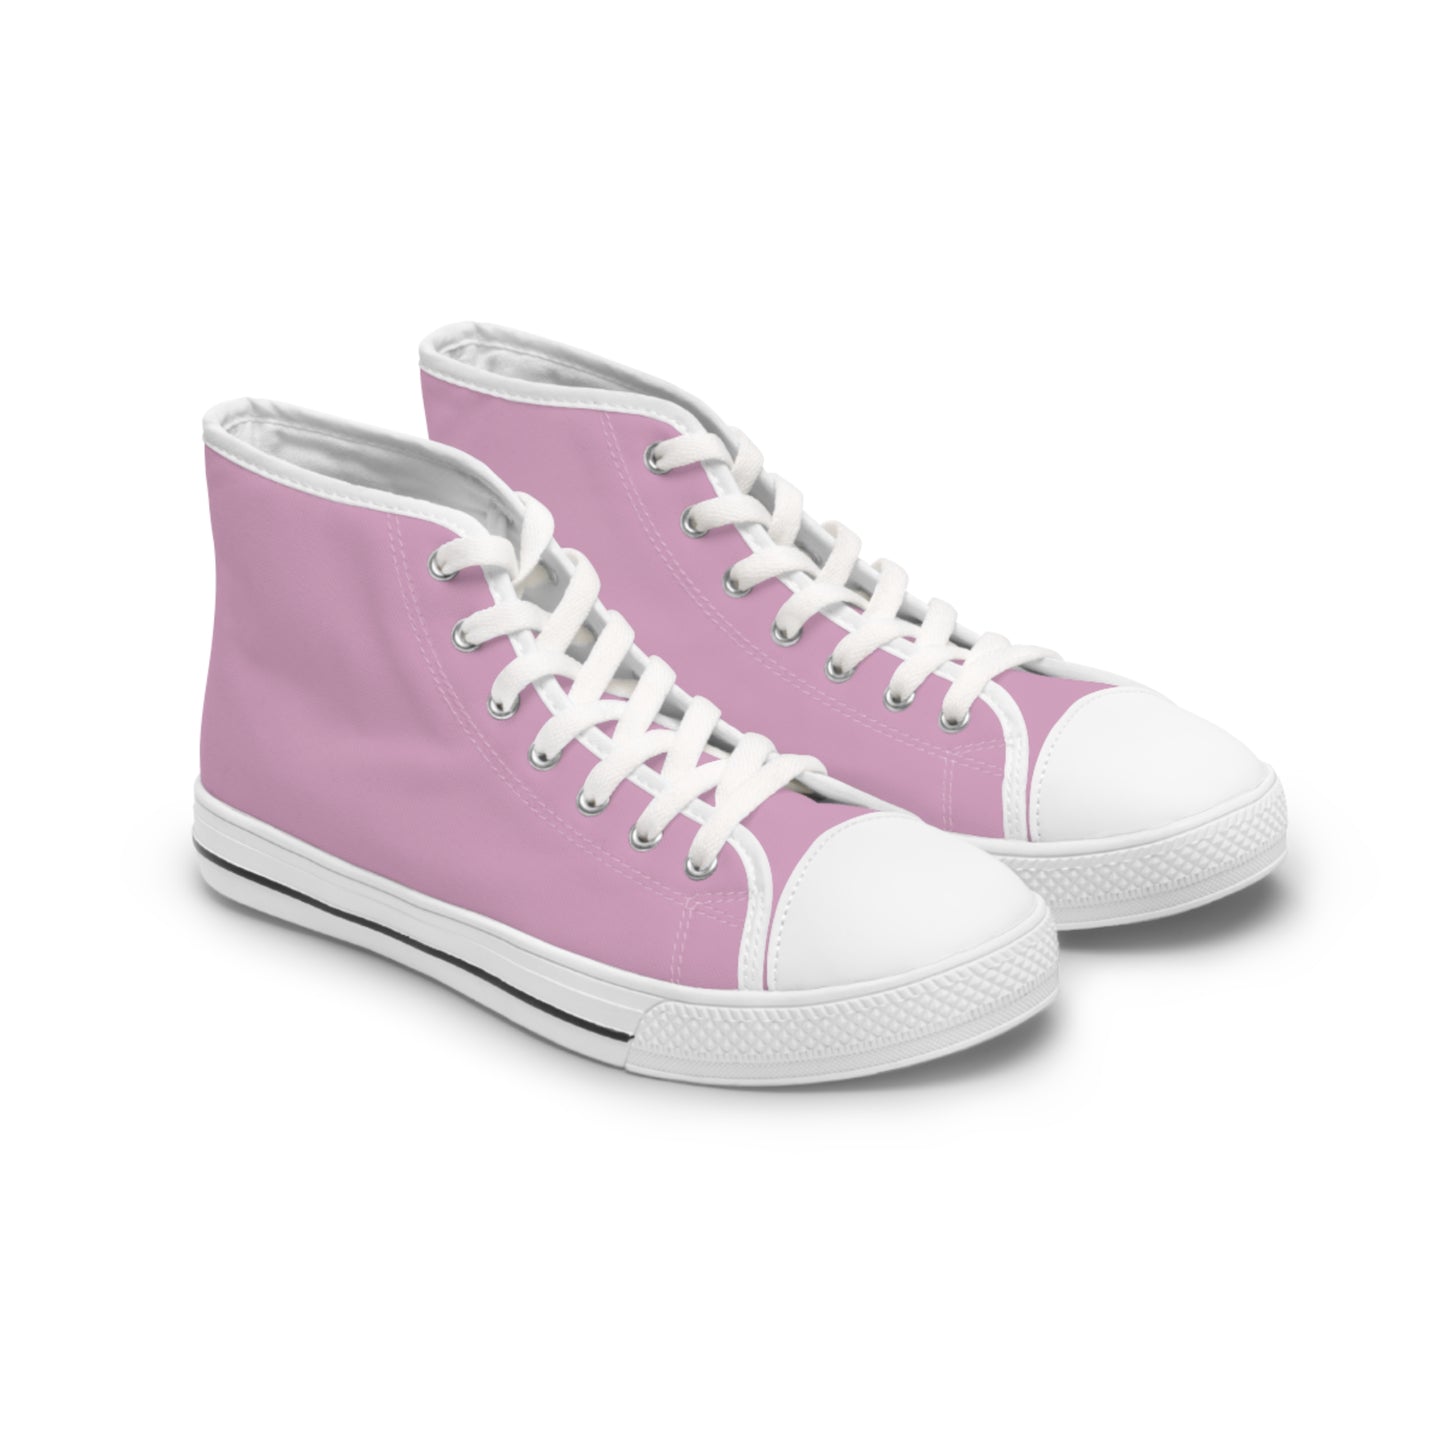 Women's Canvas High Top Solid Color Sneakers - Faded Bubblegum US 12 White sole